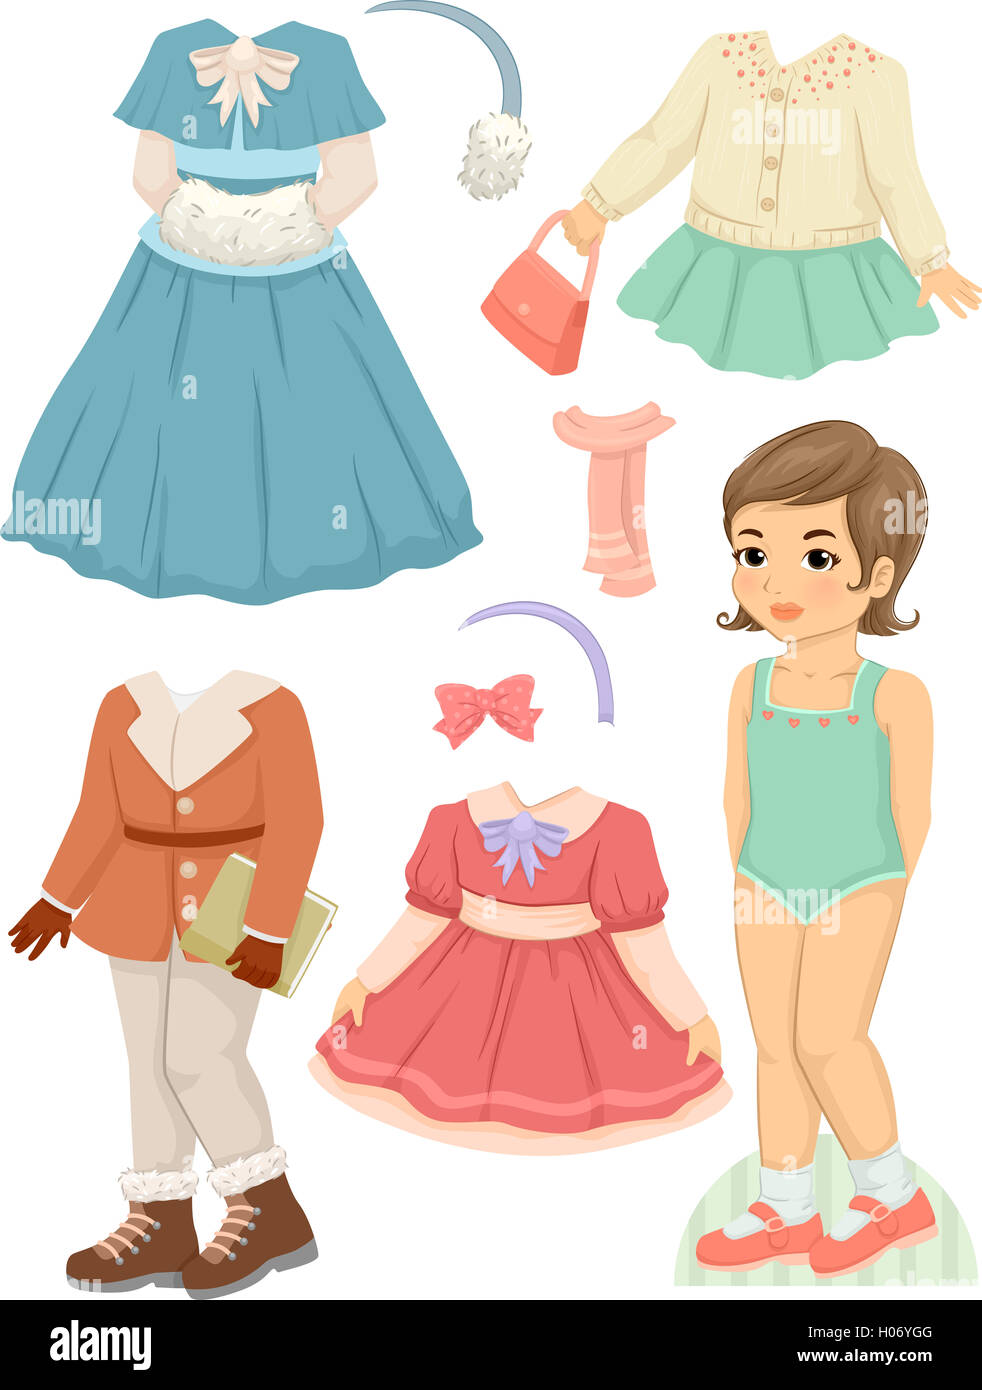 Illustration Featuring a Paper Doll and a Set of Winter Clothes Stock Photo  - Alamy